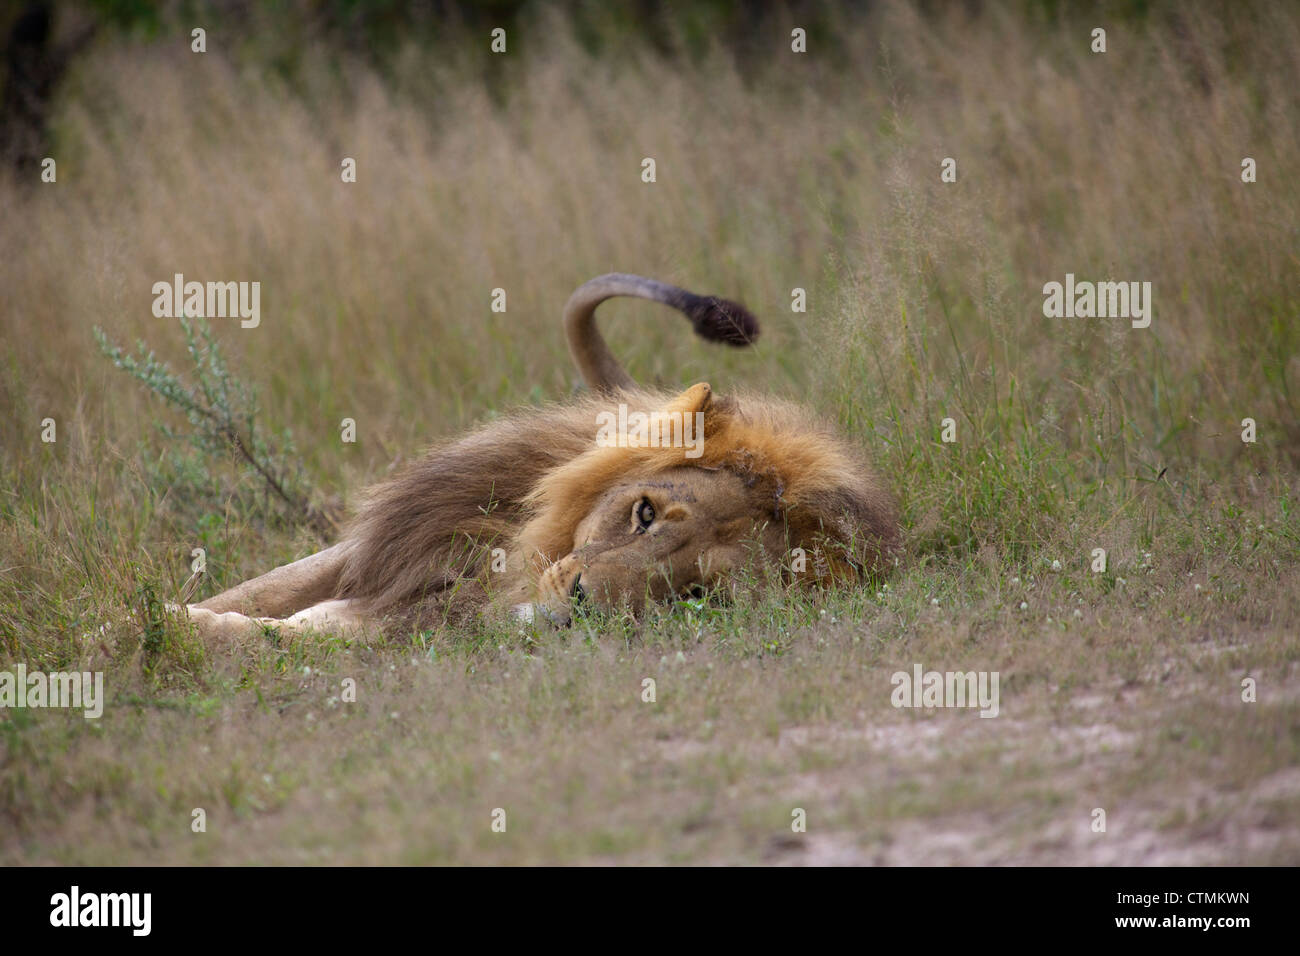 A low angle view of a Lion lying on his side and looking at the camera, Okavango Delta, Botswana Stock Photo